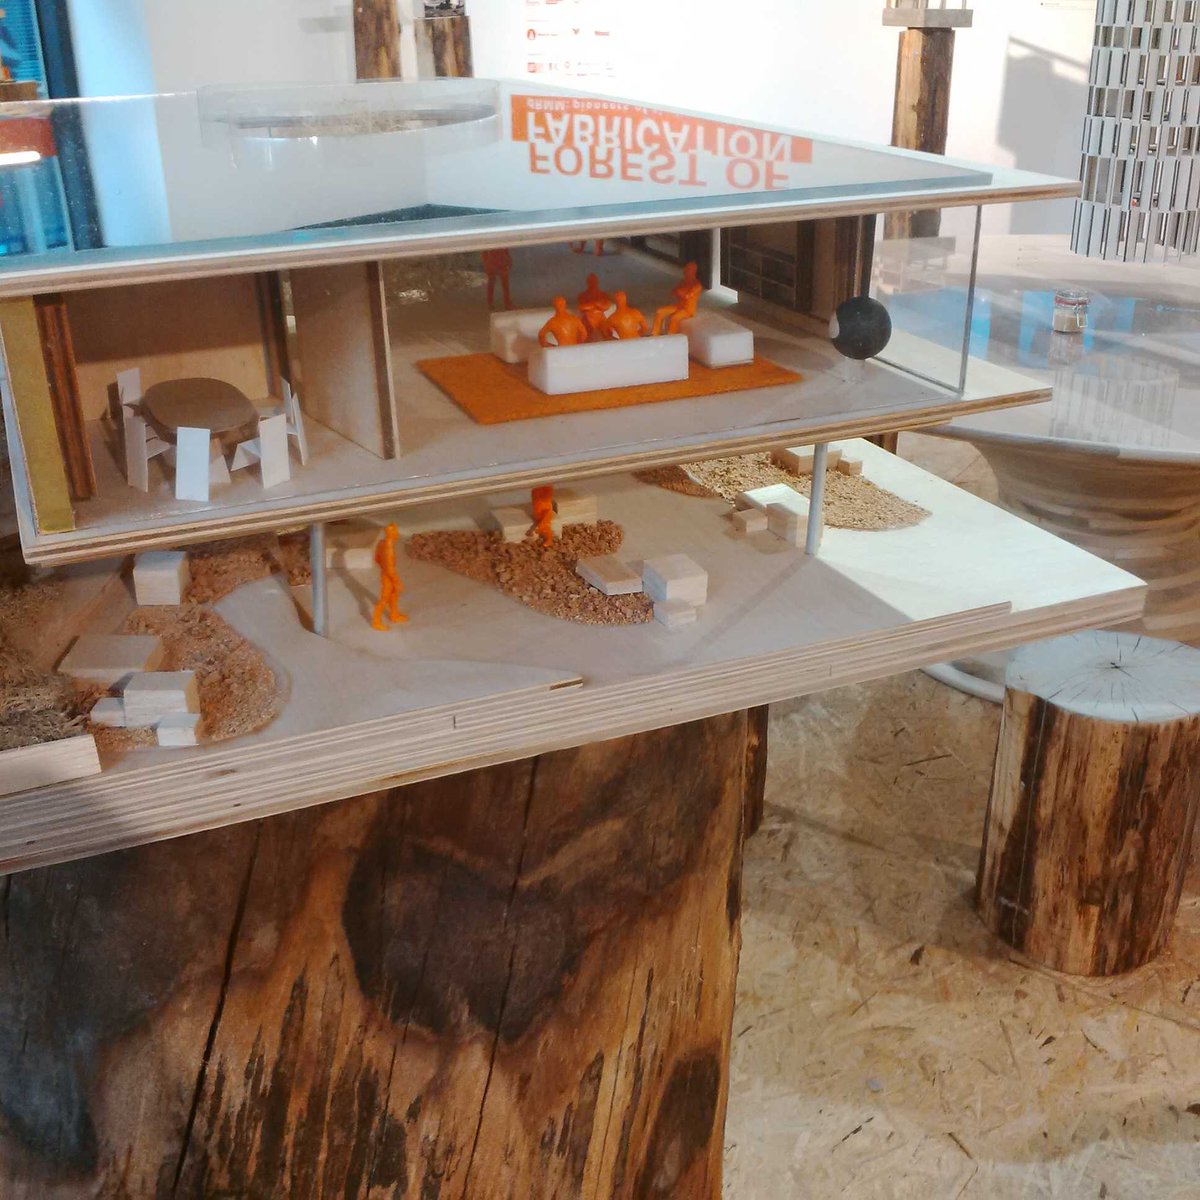 Been to the Building Centre today for Forest of Fabrication exhibition by dRMM #timberarchitecture